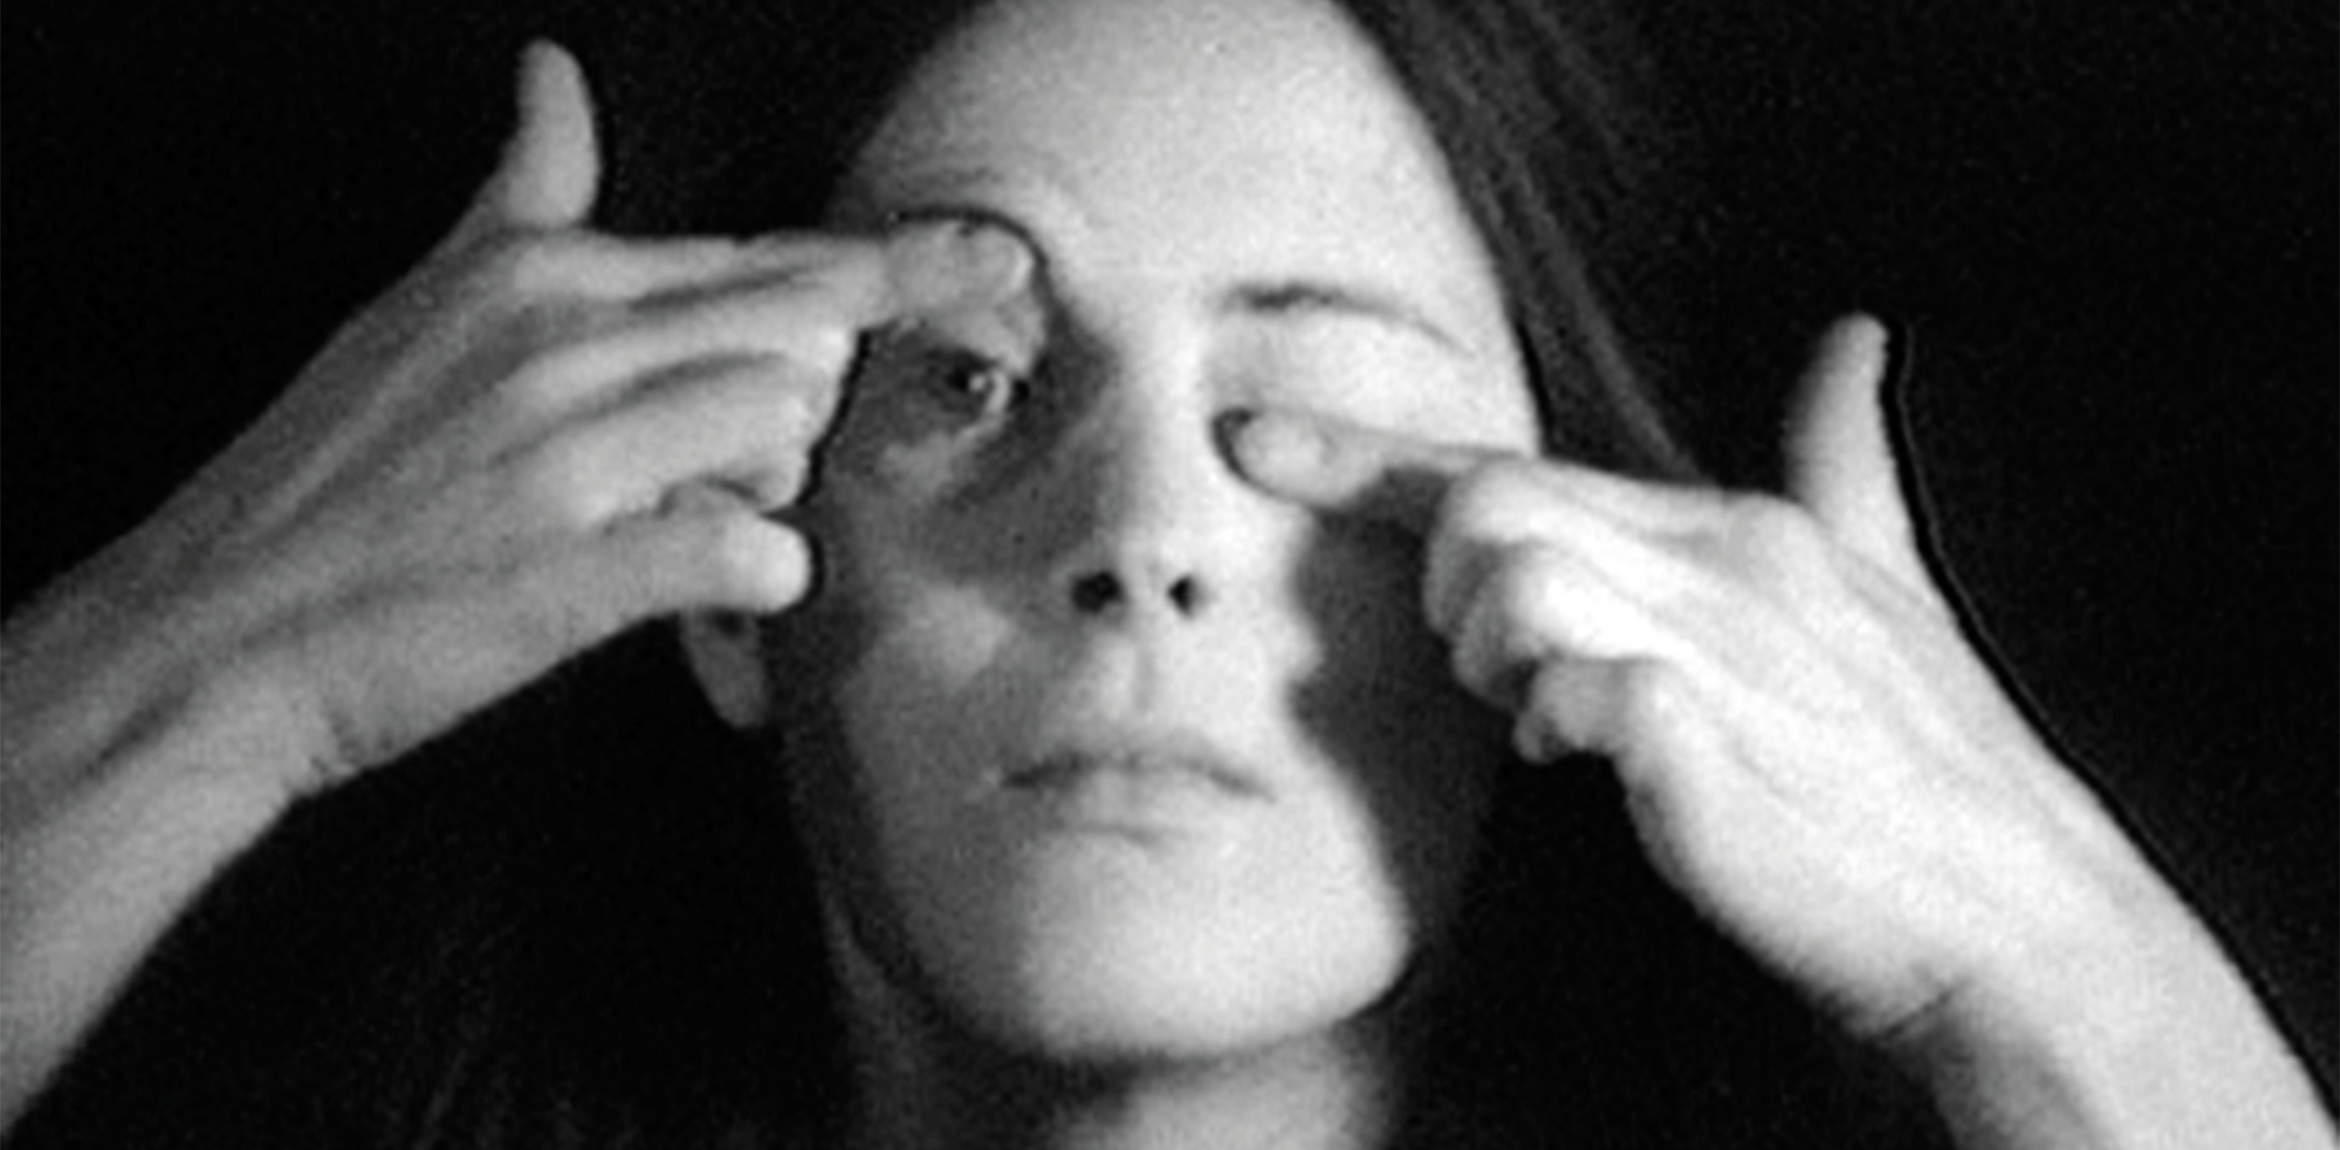 Film still from Hannah Wilke's "Gestures" (1974) in which the artist is shown opening and closing her eyelids with her hands